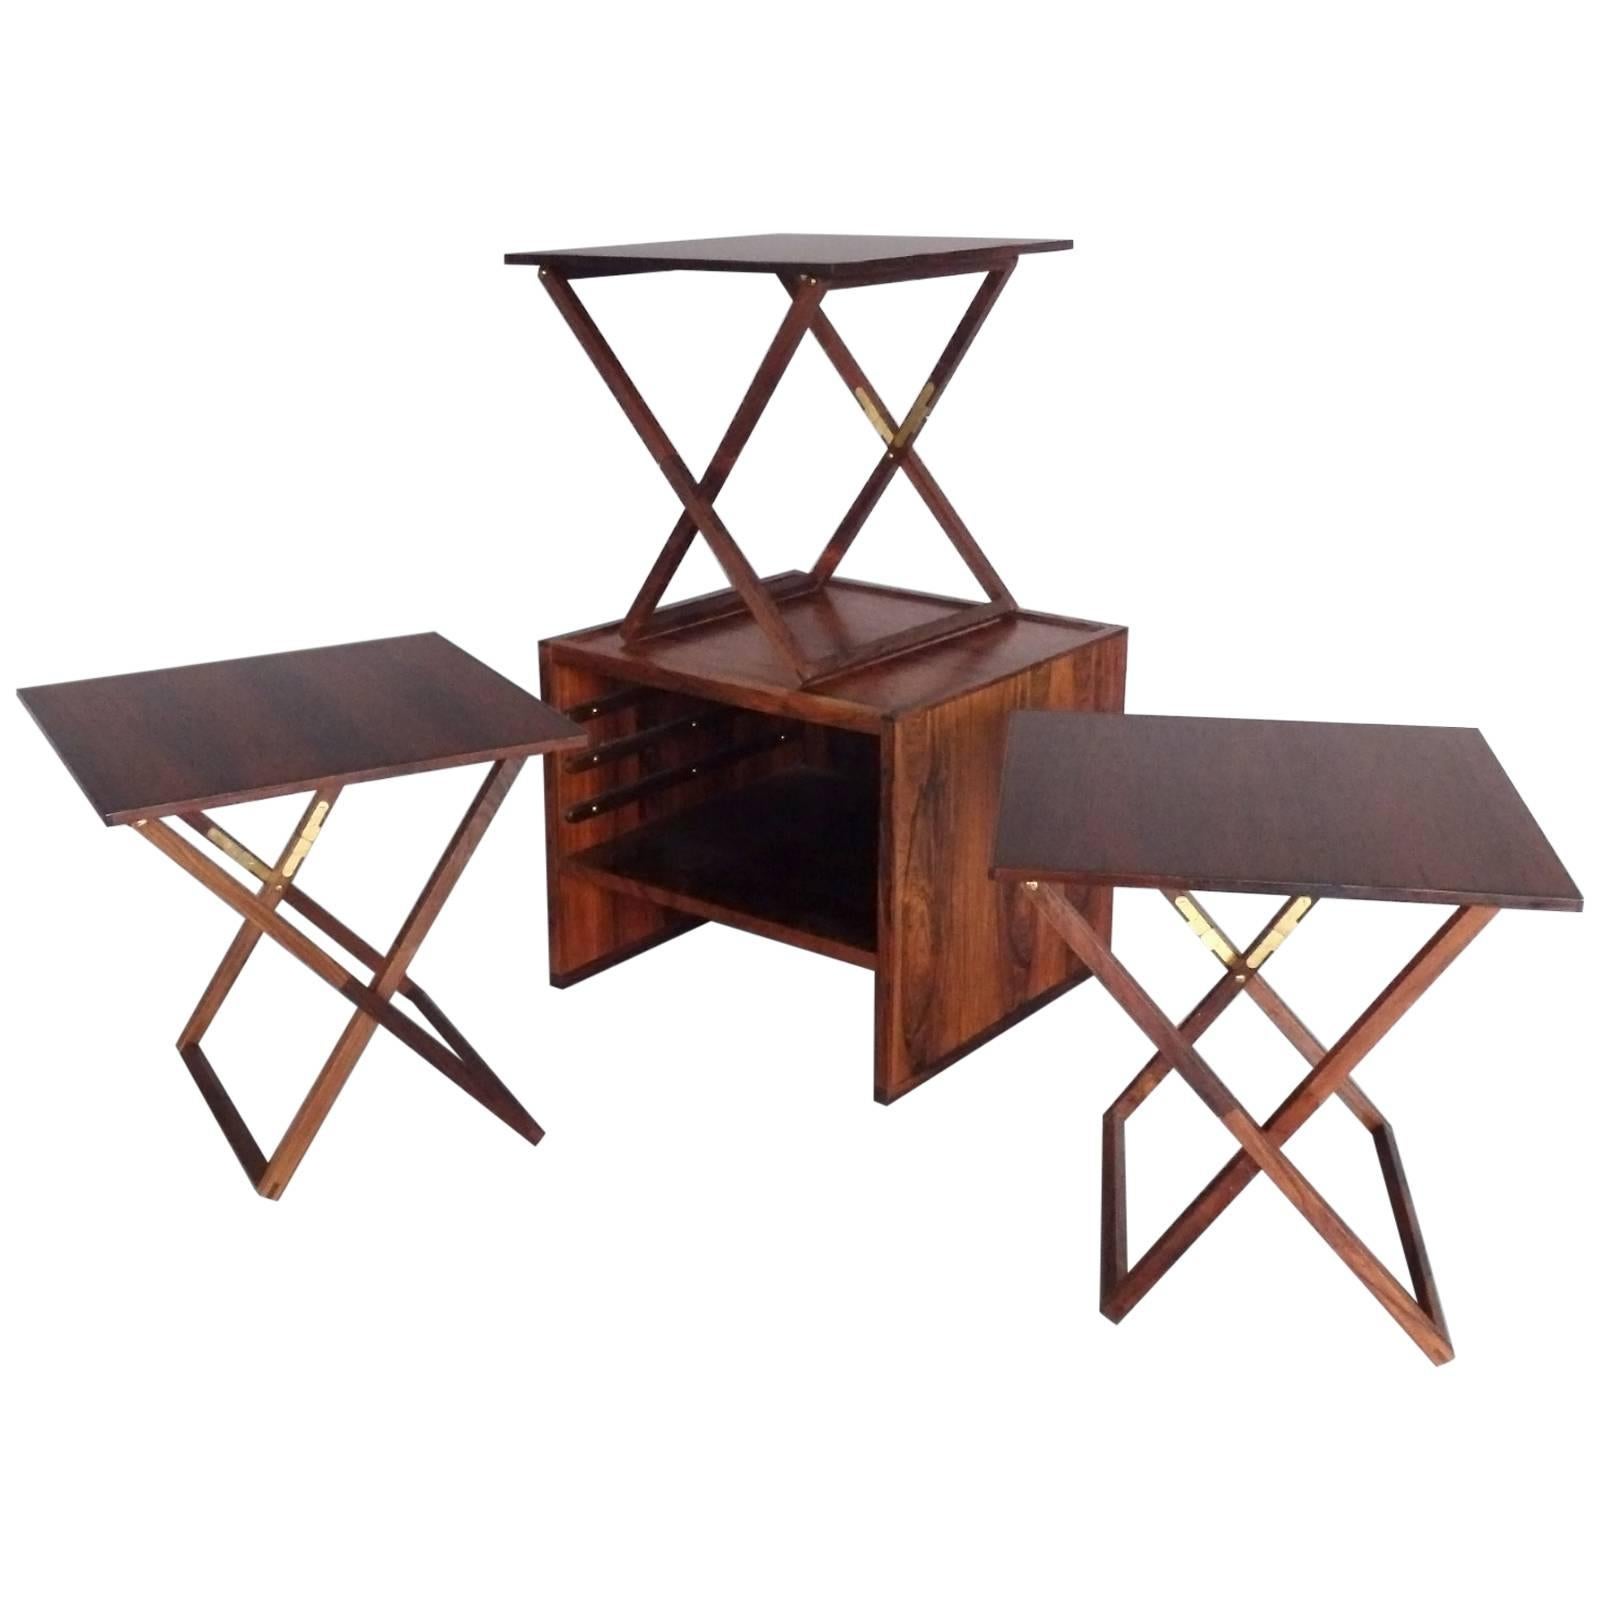 Illums Bolighus Nesting Tables and Stacking Tables